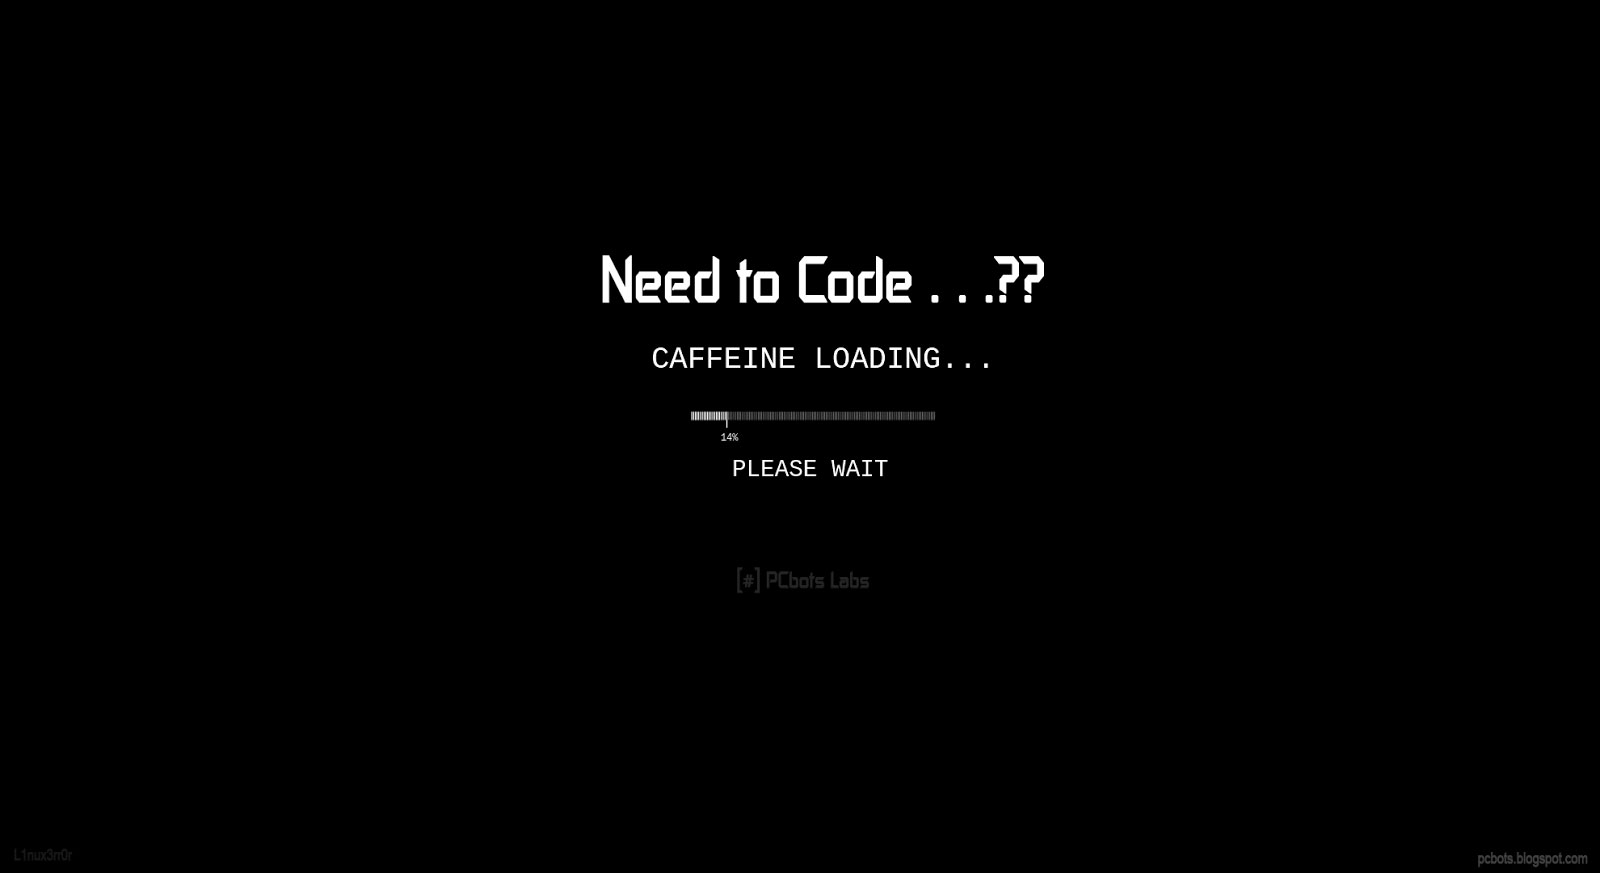 Coding Wallpaper, Need To Code, Caffiene Loading, Please Wait